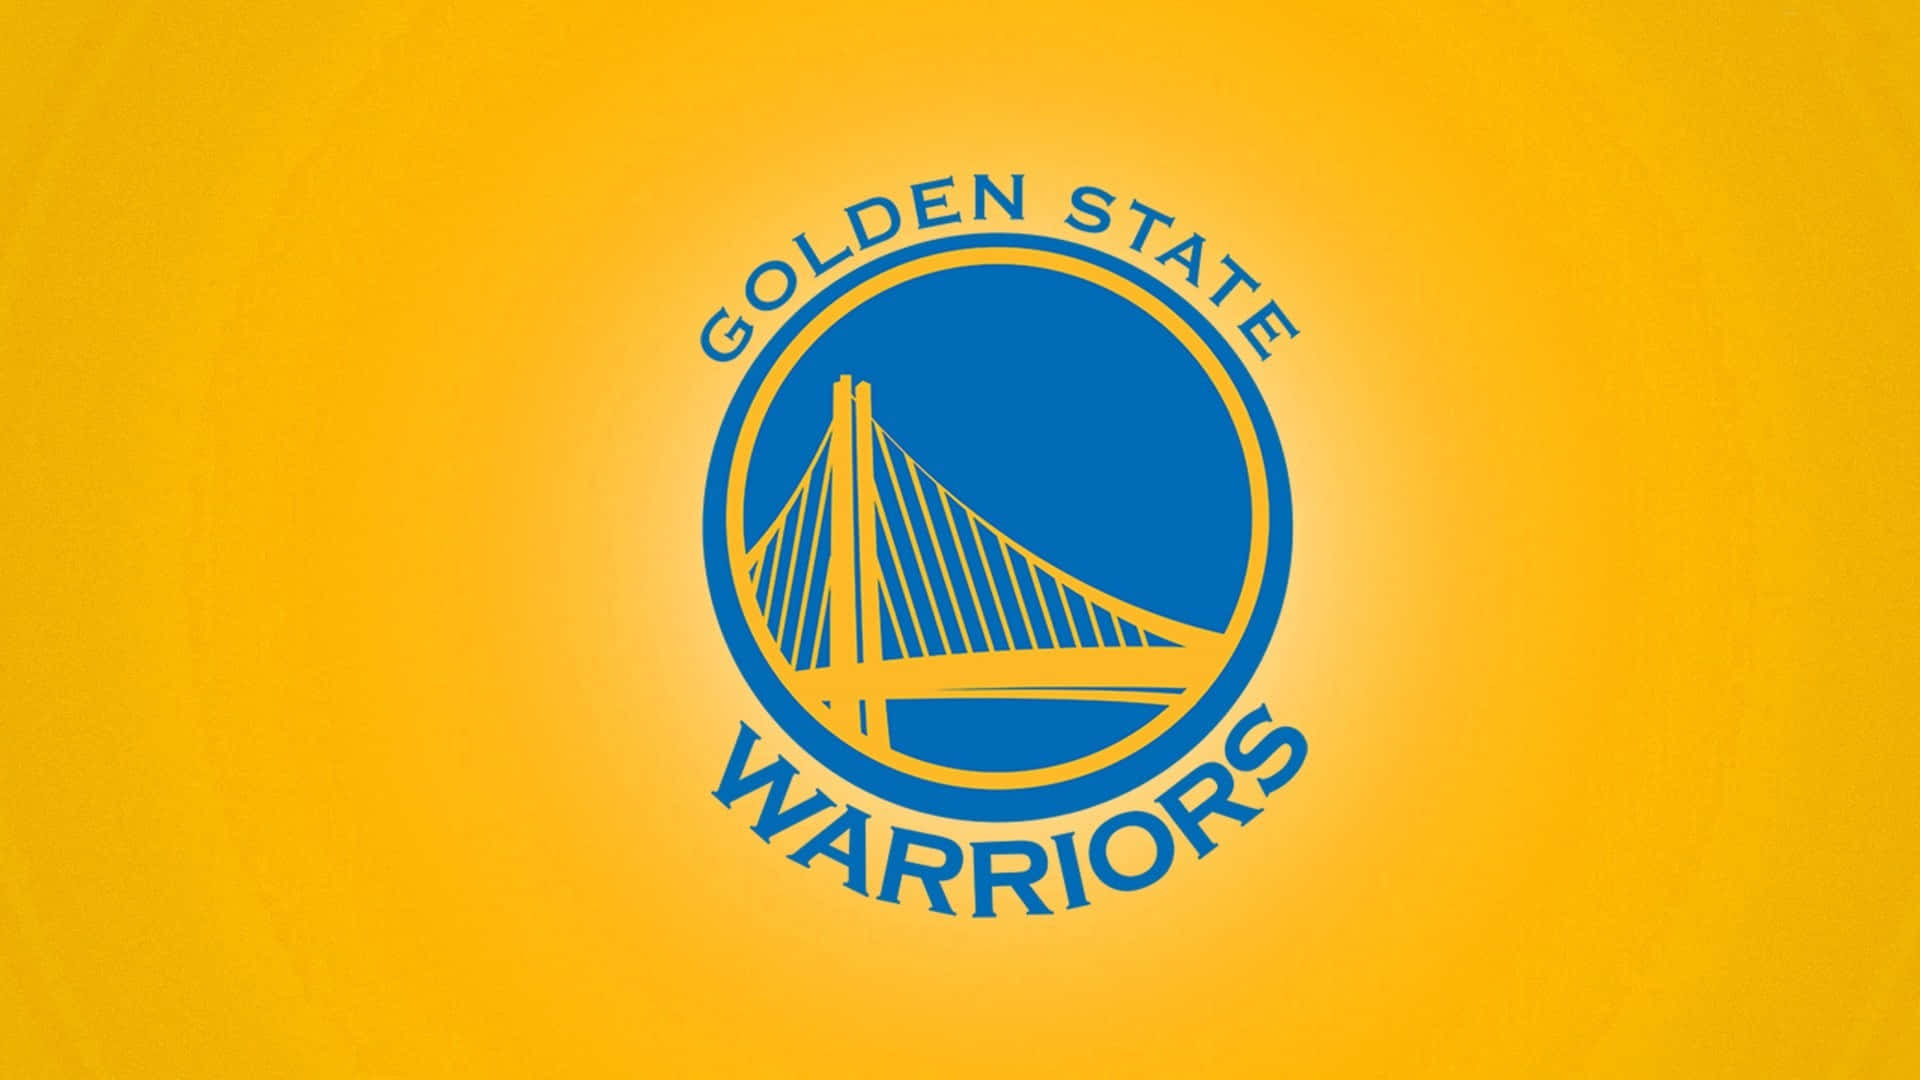 Show your support for the Golden State Warriors with their official logo. Wallpaper